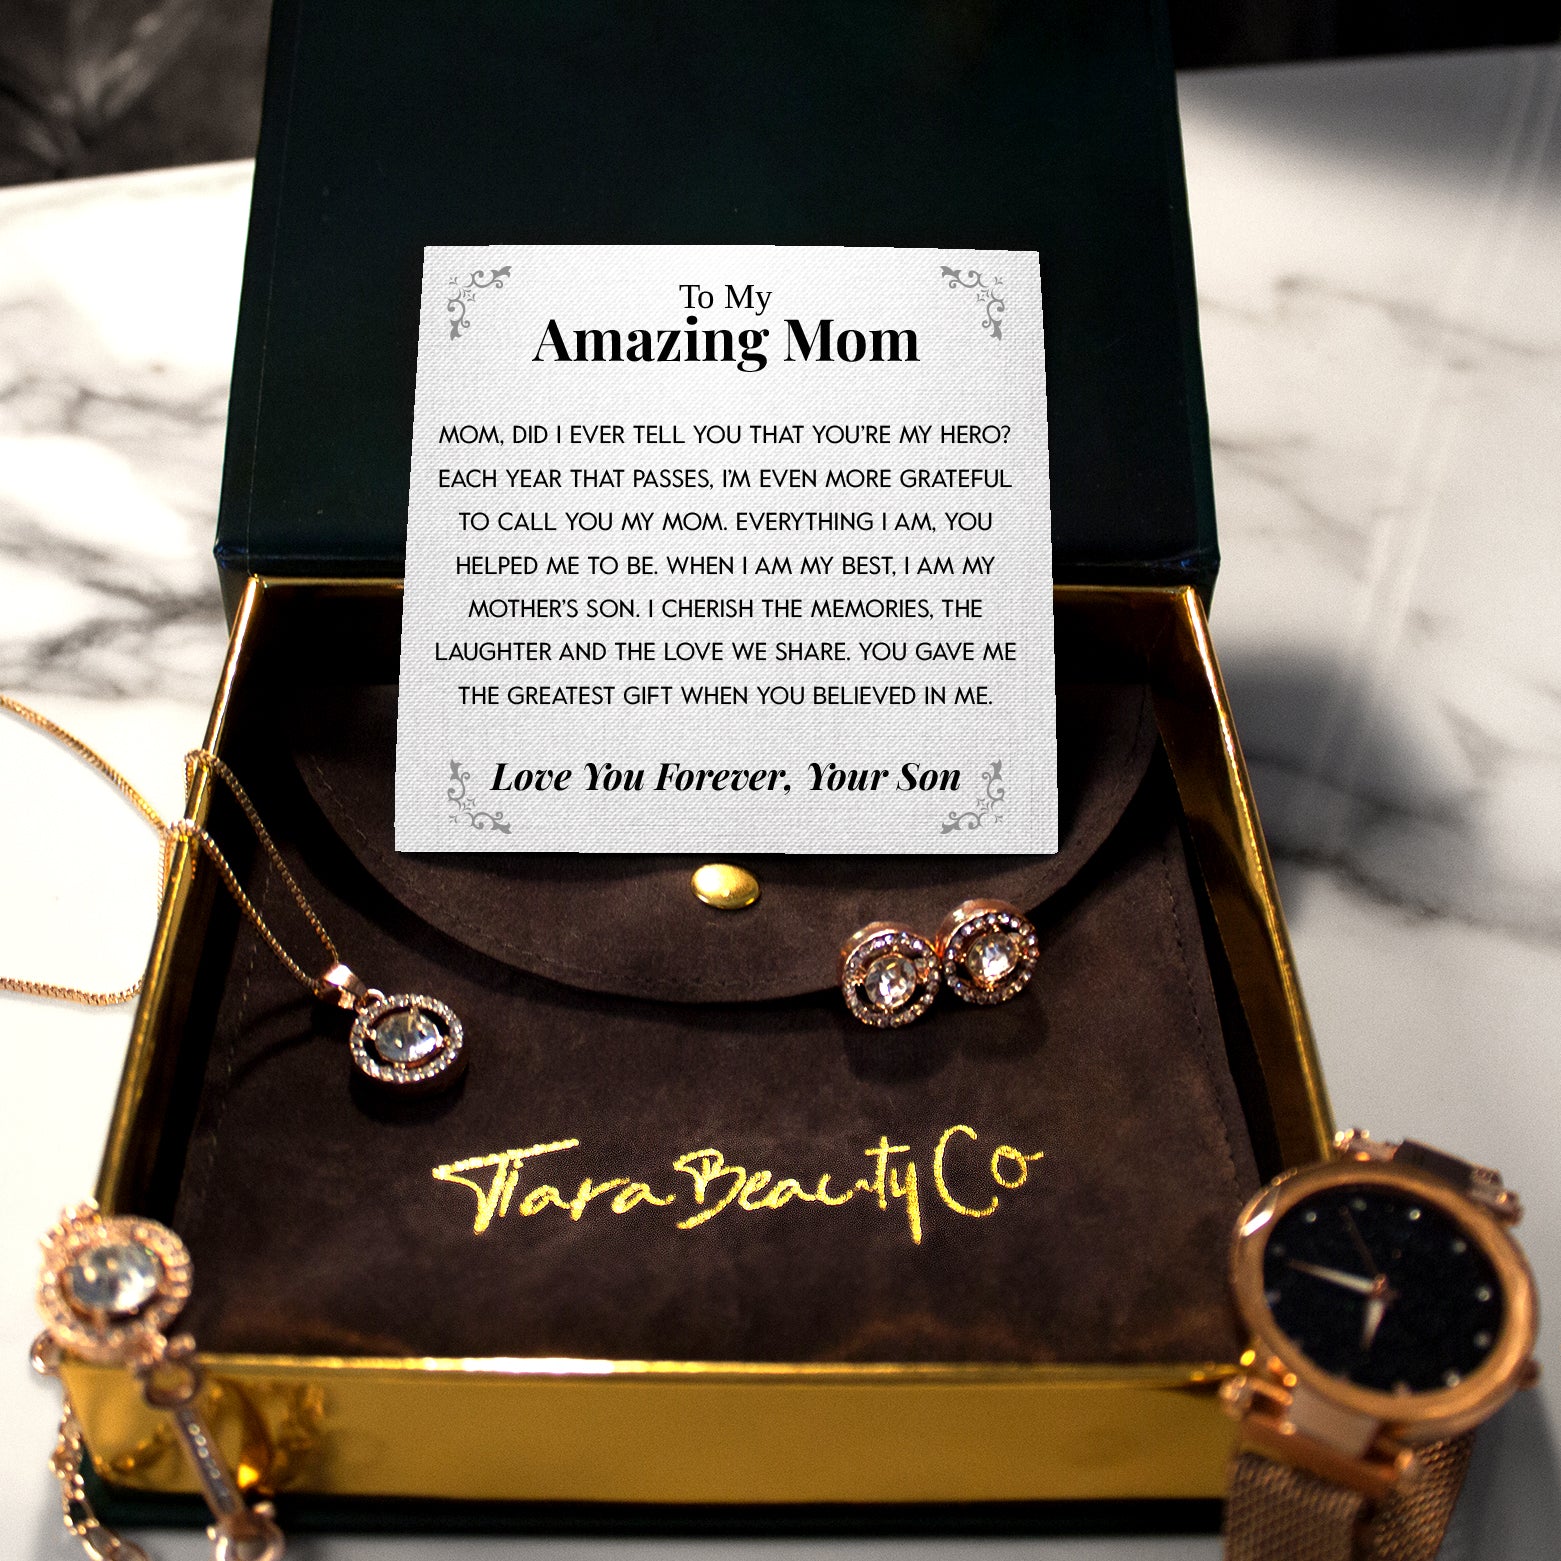 To My Amazing Mom | "The Greatest Gift" | Cosmopolitan Set